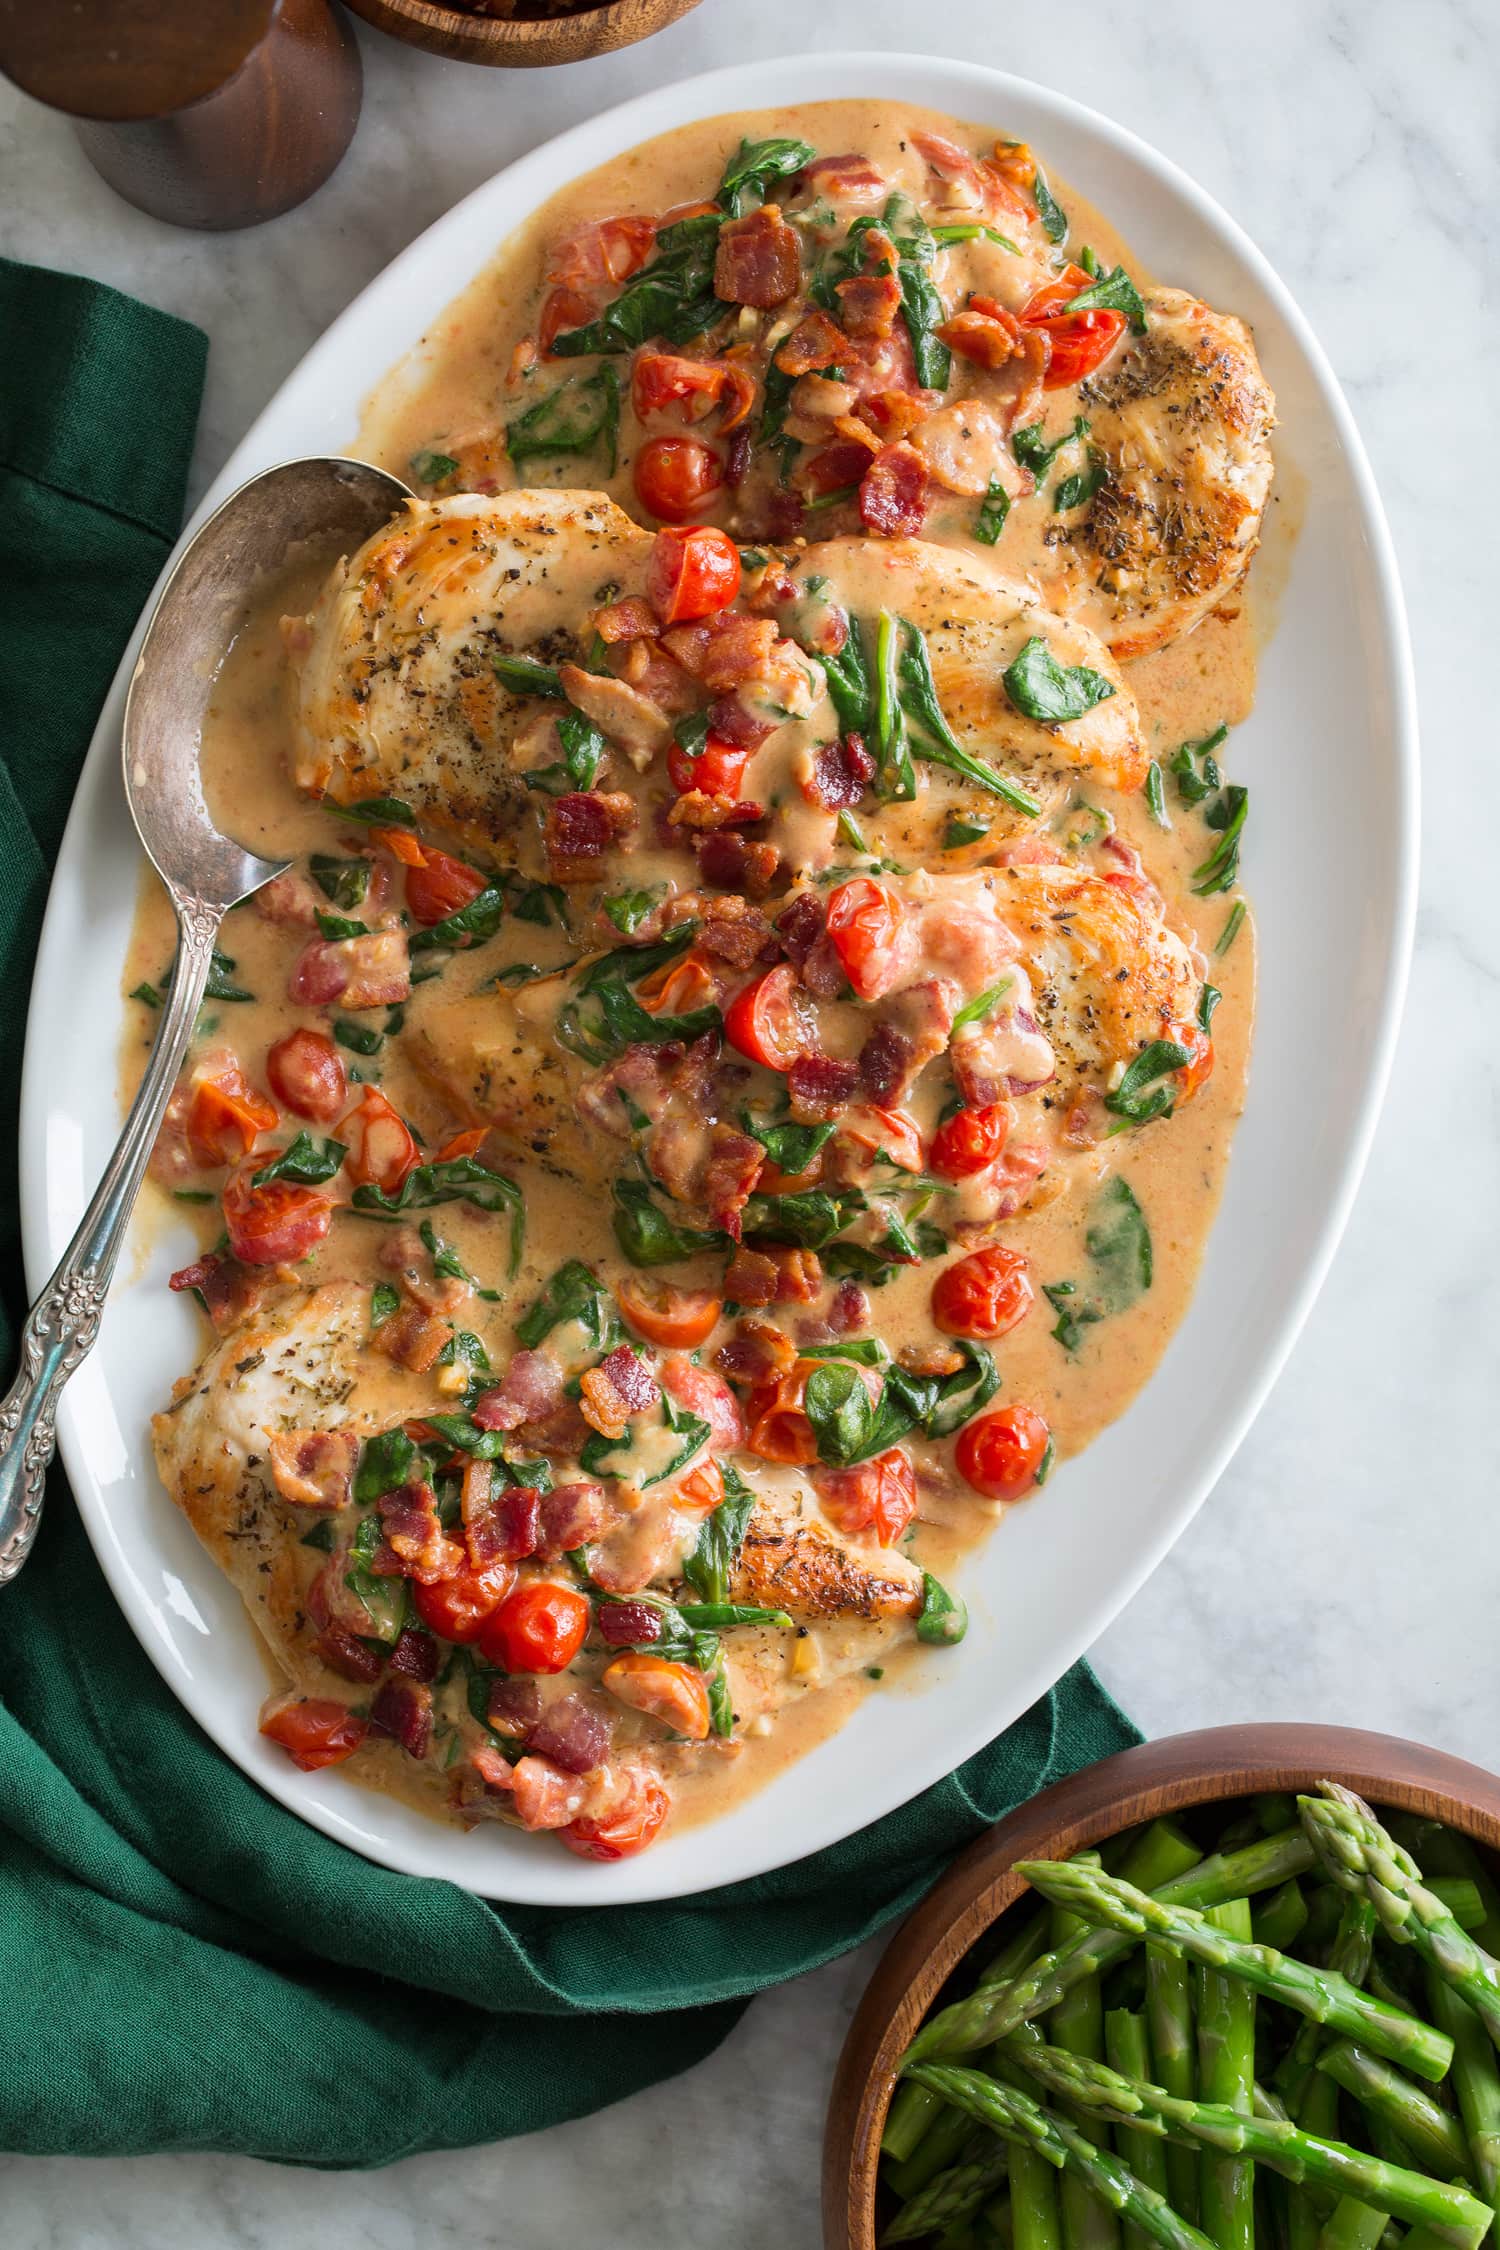 Pan seared chicken with cream bacon tomato spinach sauce.